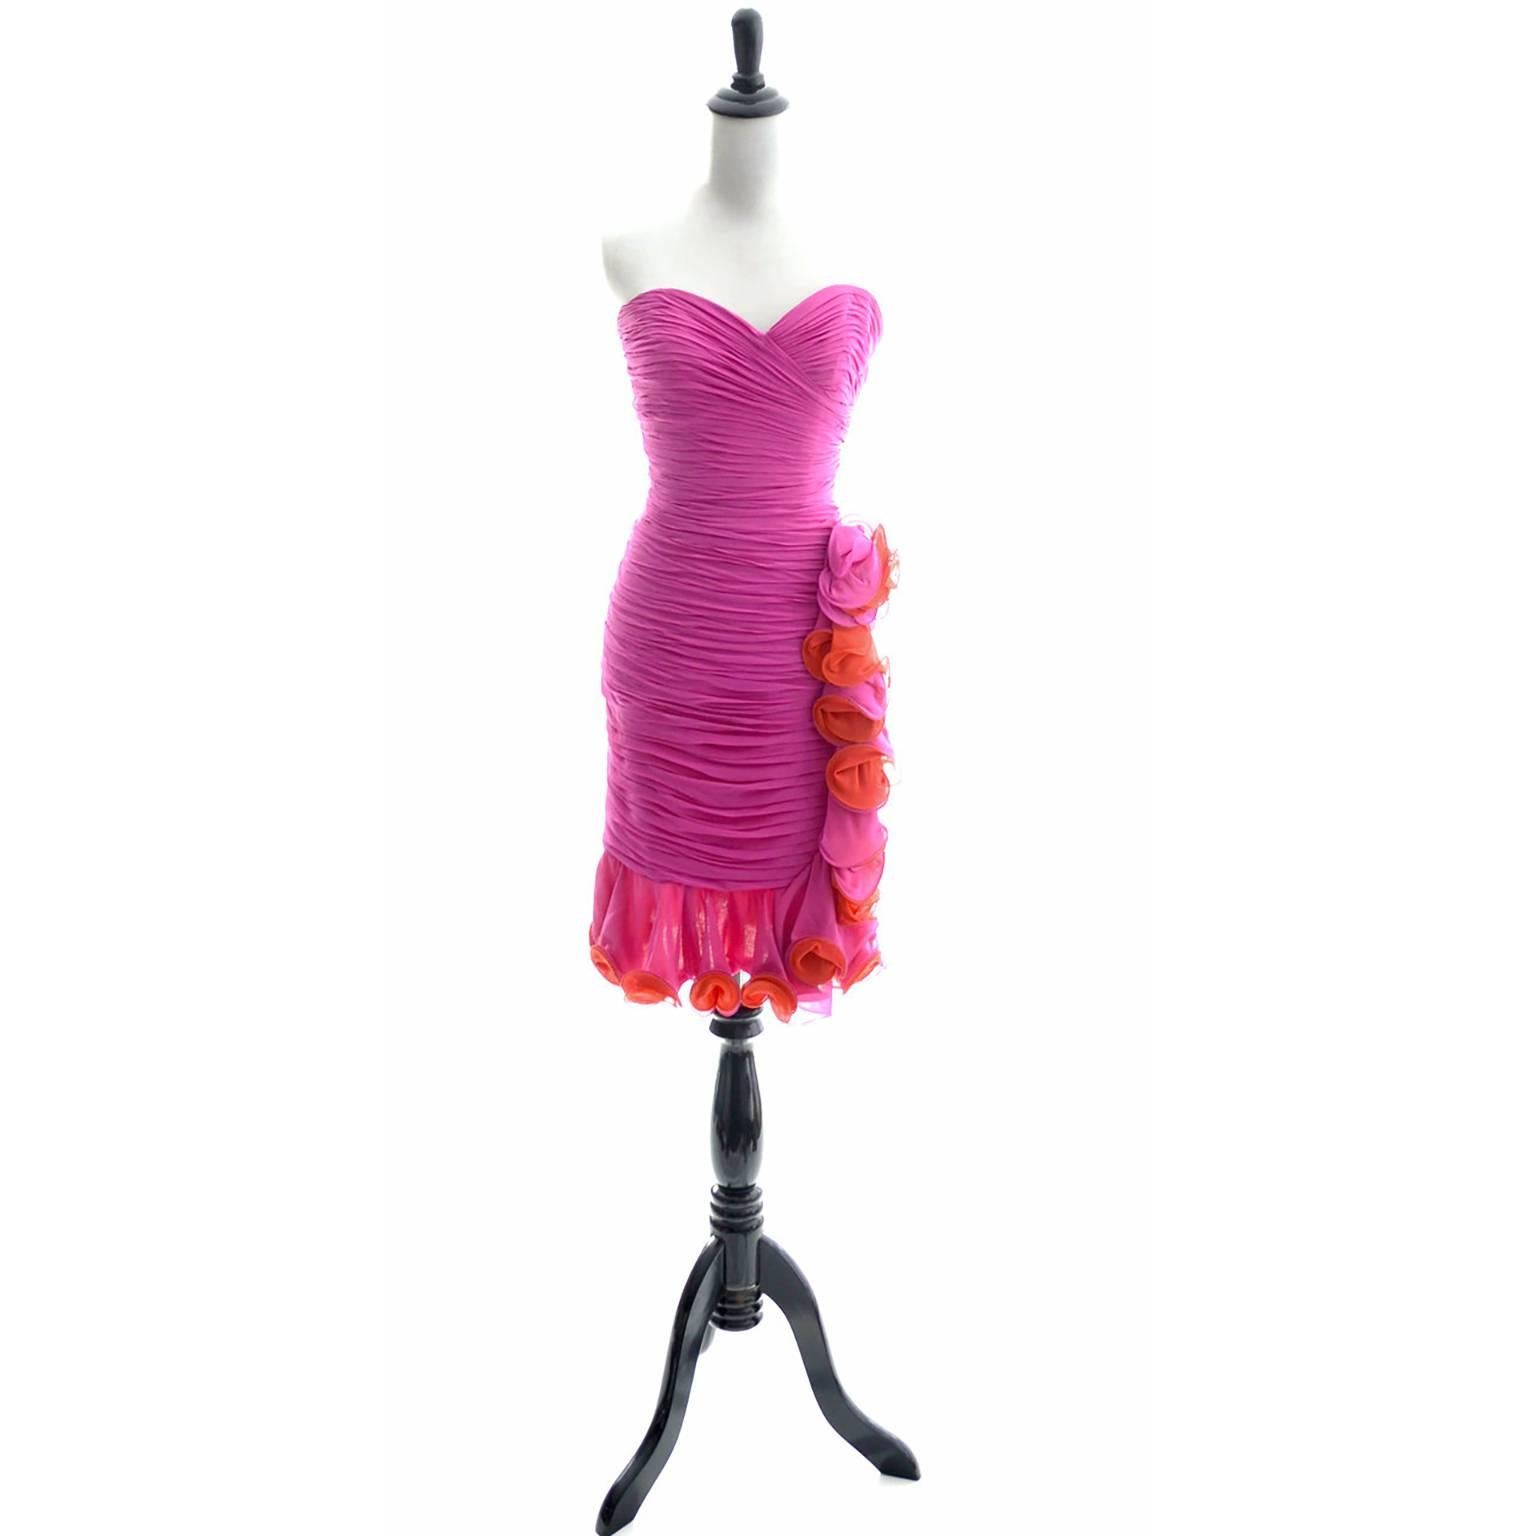 This is a fabulous vintage dress from the 1980's by A.J. Bari! The fit of this micro pleated wiggle dress is sublime with the heart shaped bust line and the curve hugging shape. I also love the colors - bright pink and orange, and the pretty loopy